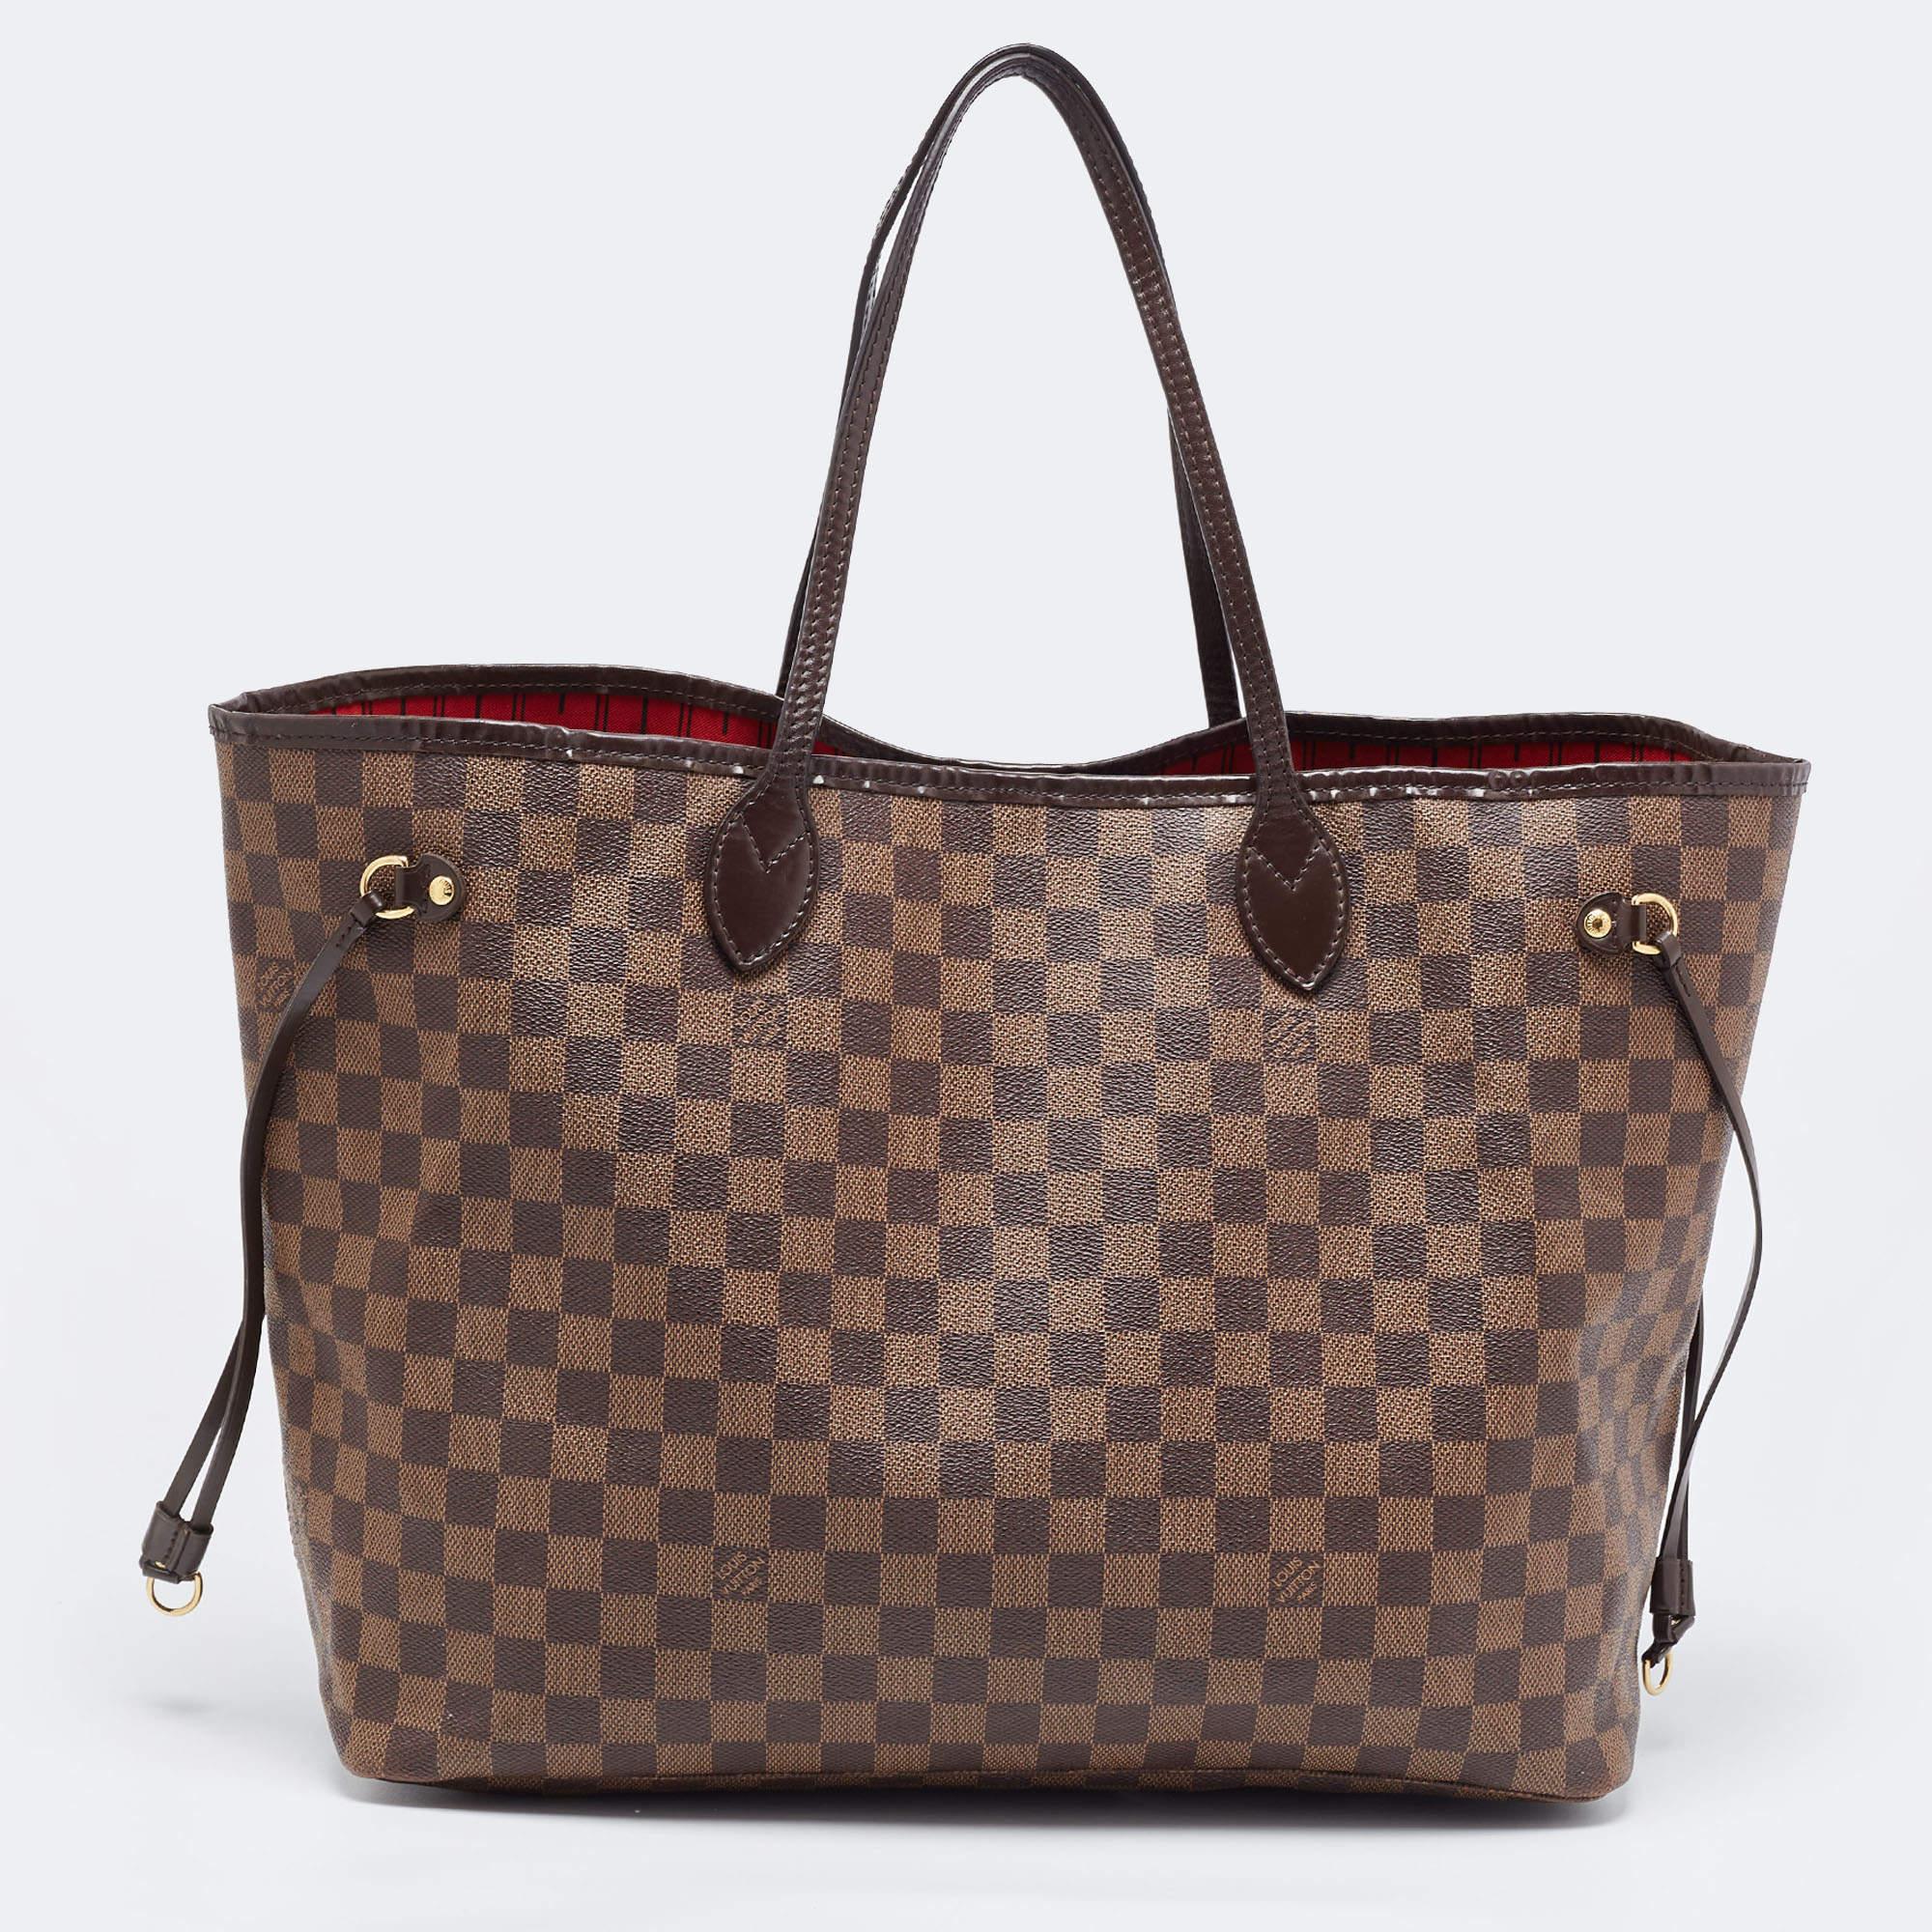 Louis Vuitton’s Neverfull was first introduced in 2007 and is the perfect everyday tote. Crafted from signature monogram canvas, Neverfull is versatile in design. The limited edition tote is fabric lined and has a spacious interior that will hold